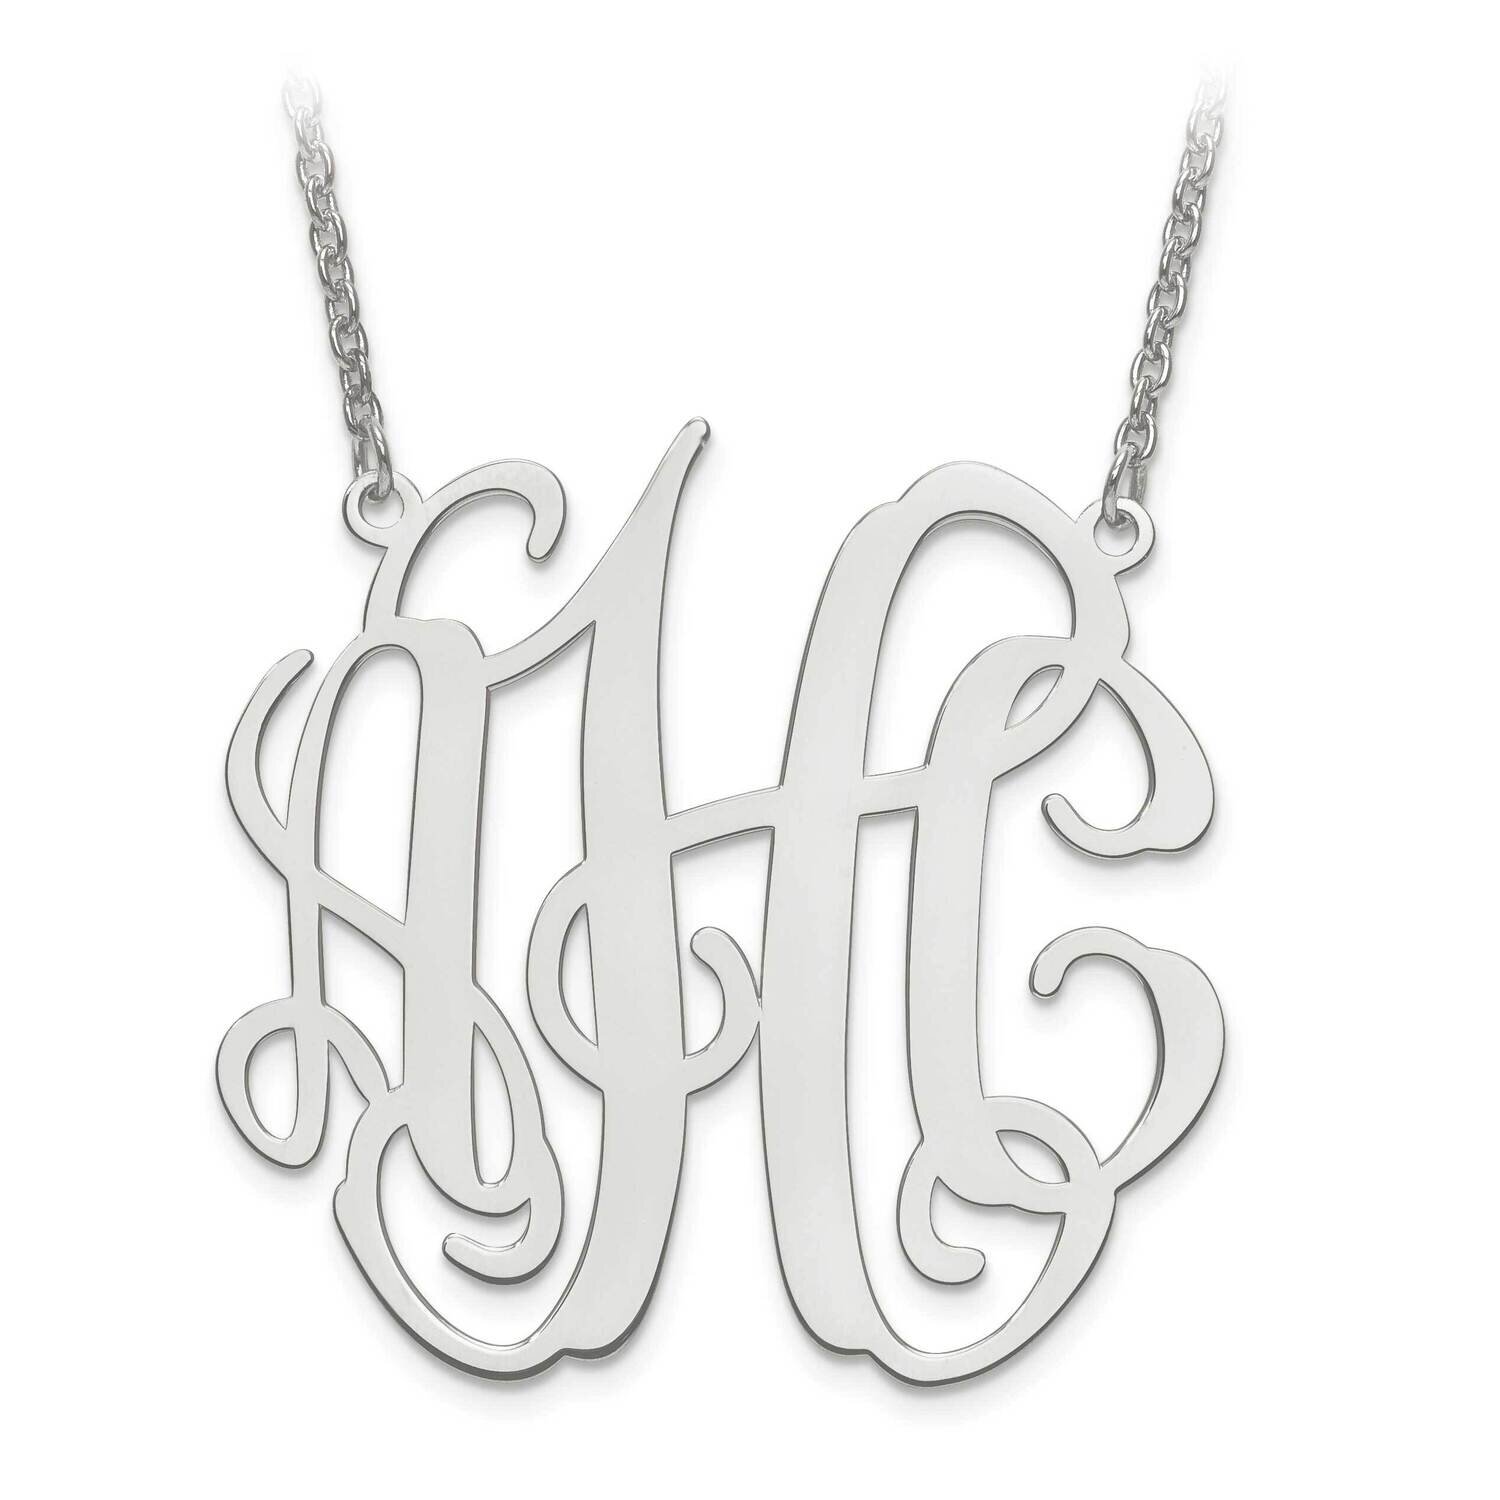 L Laser Polished Circular Shaped Monogram Plate with Chain 10k White Gold 10XNA549W